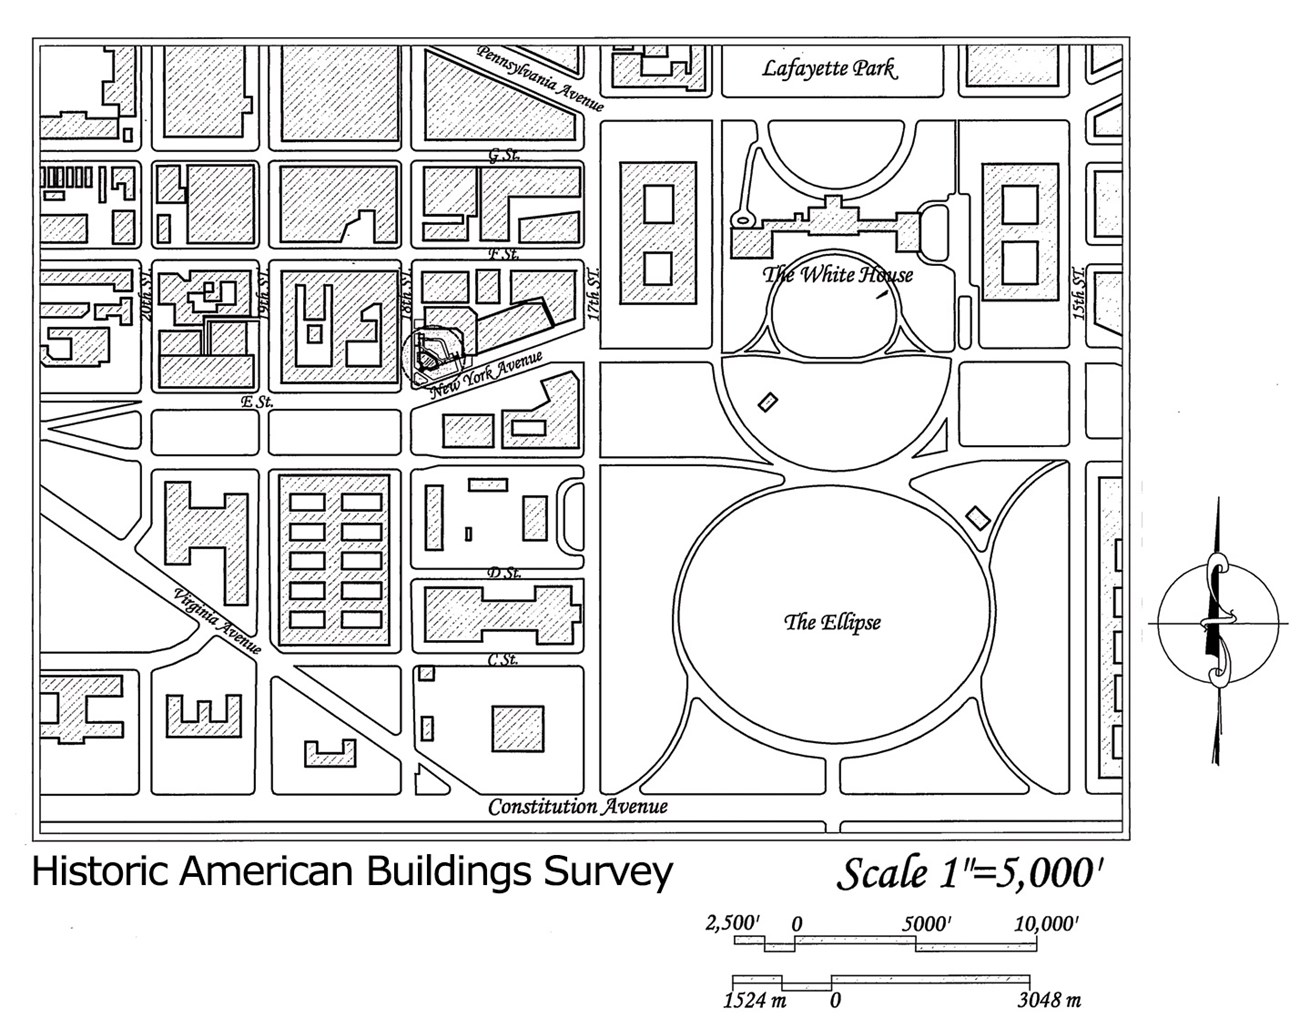 Map of the area around the White House.